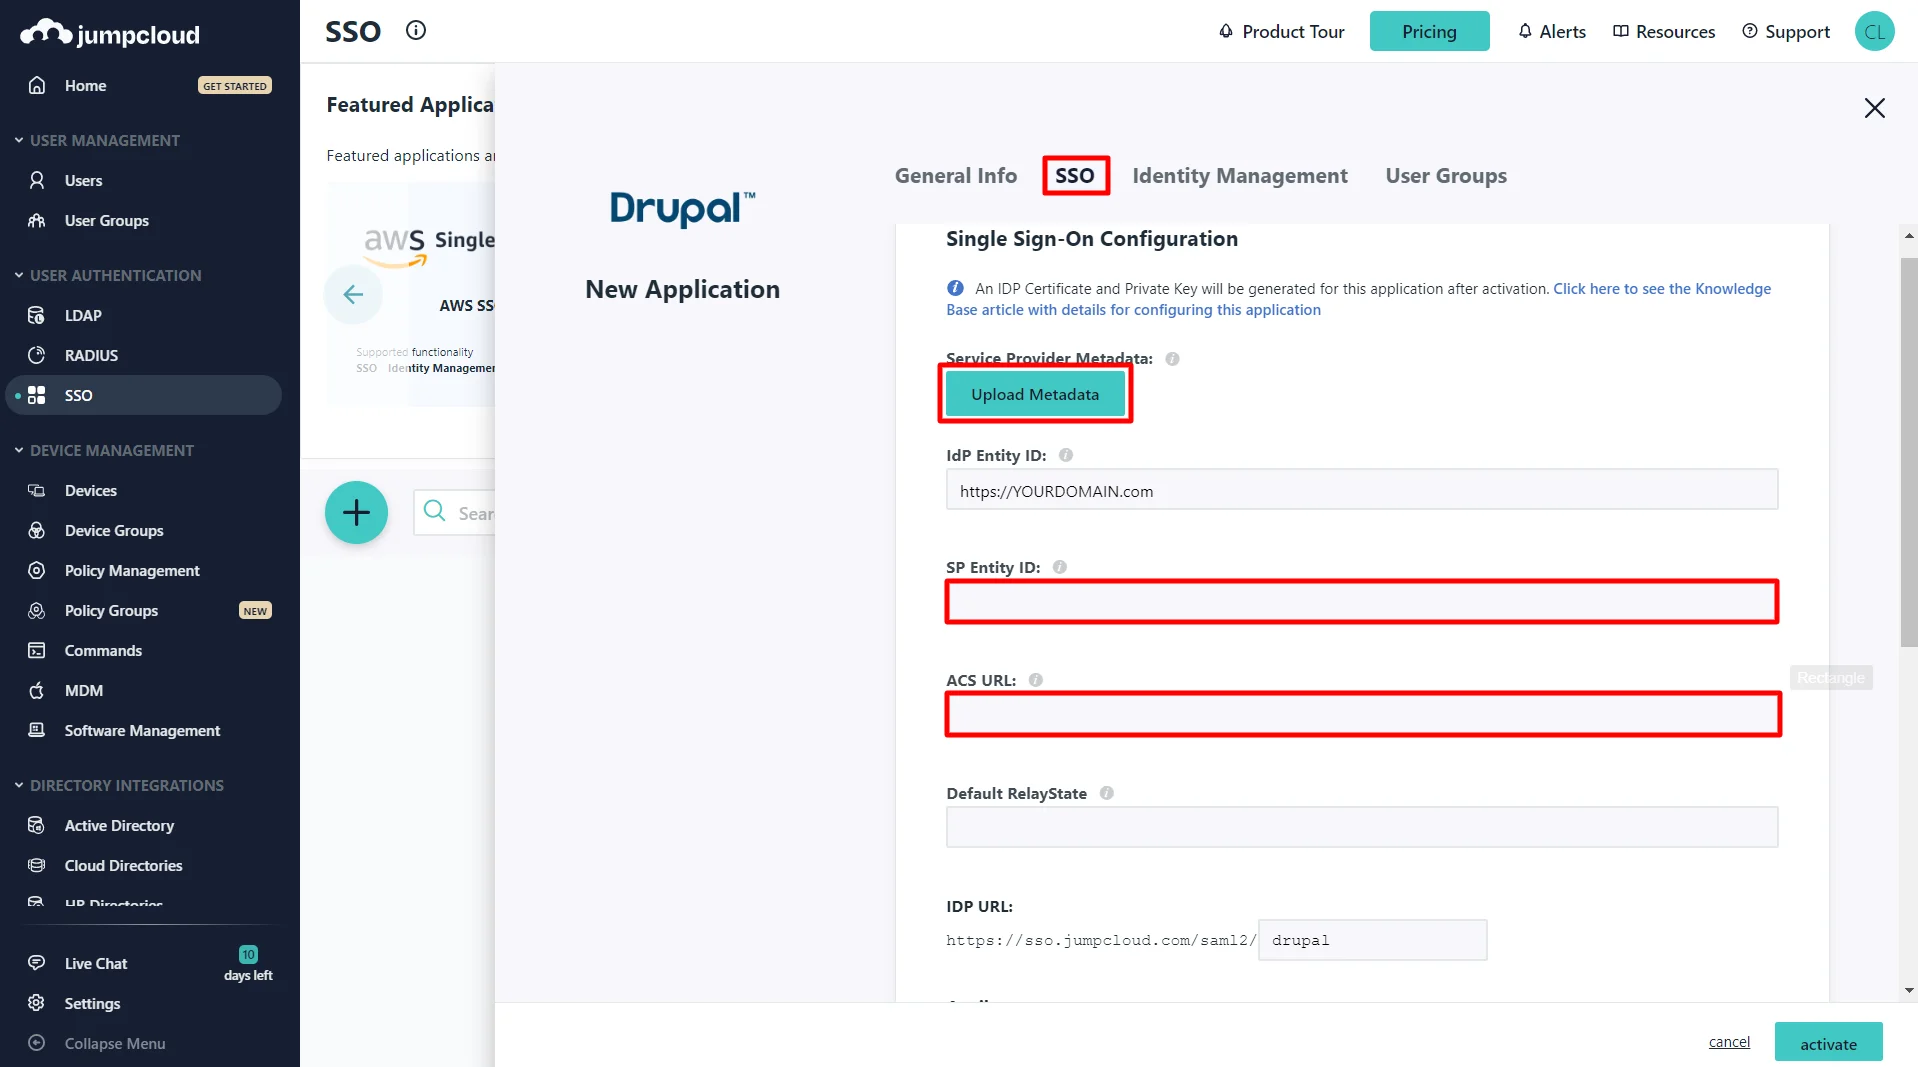 jumpcloud cross domain provisioning (scim) - either you can copy entity id and acs url from drupal saml sp module